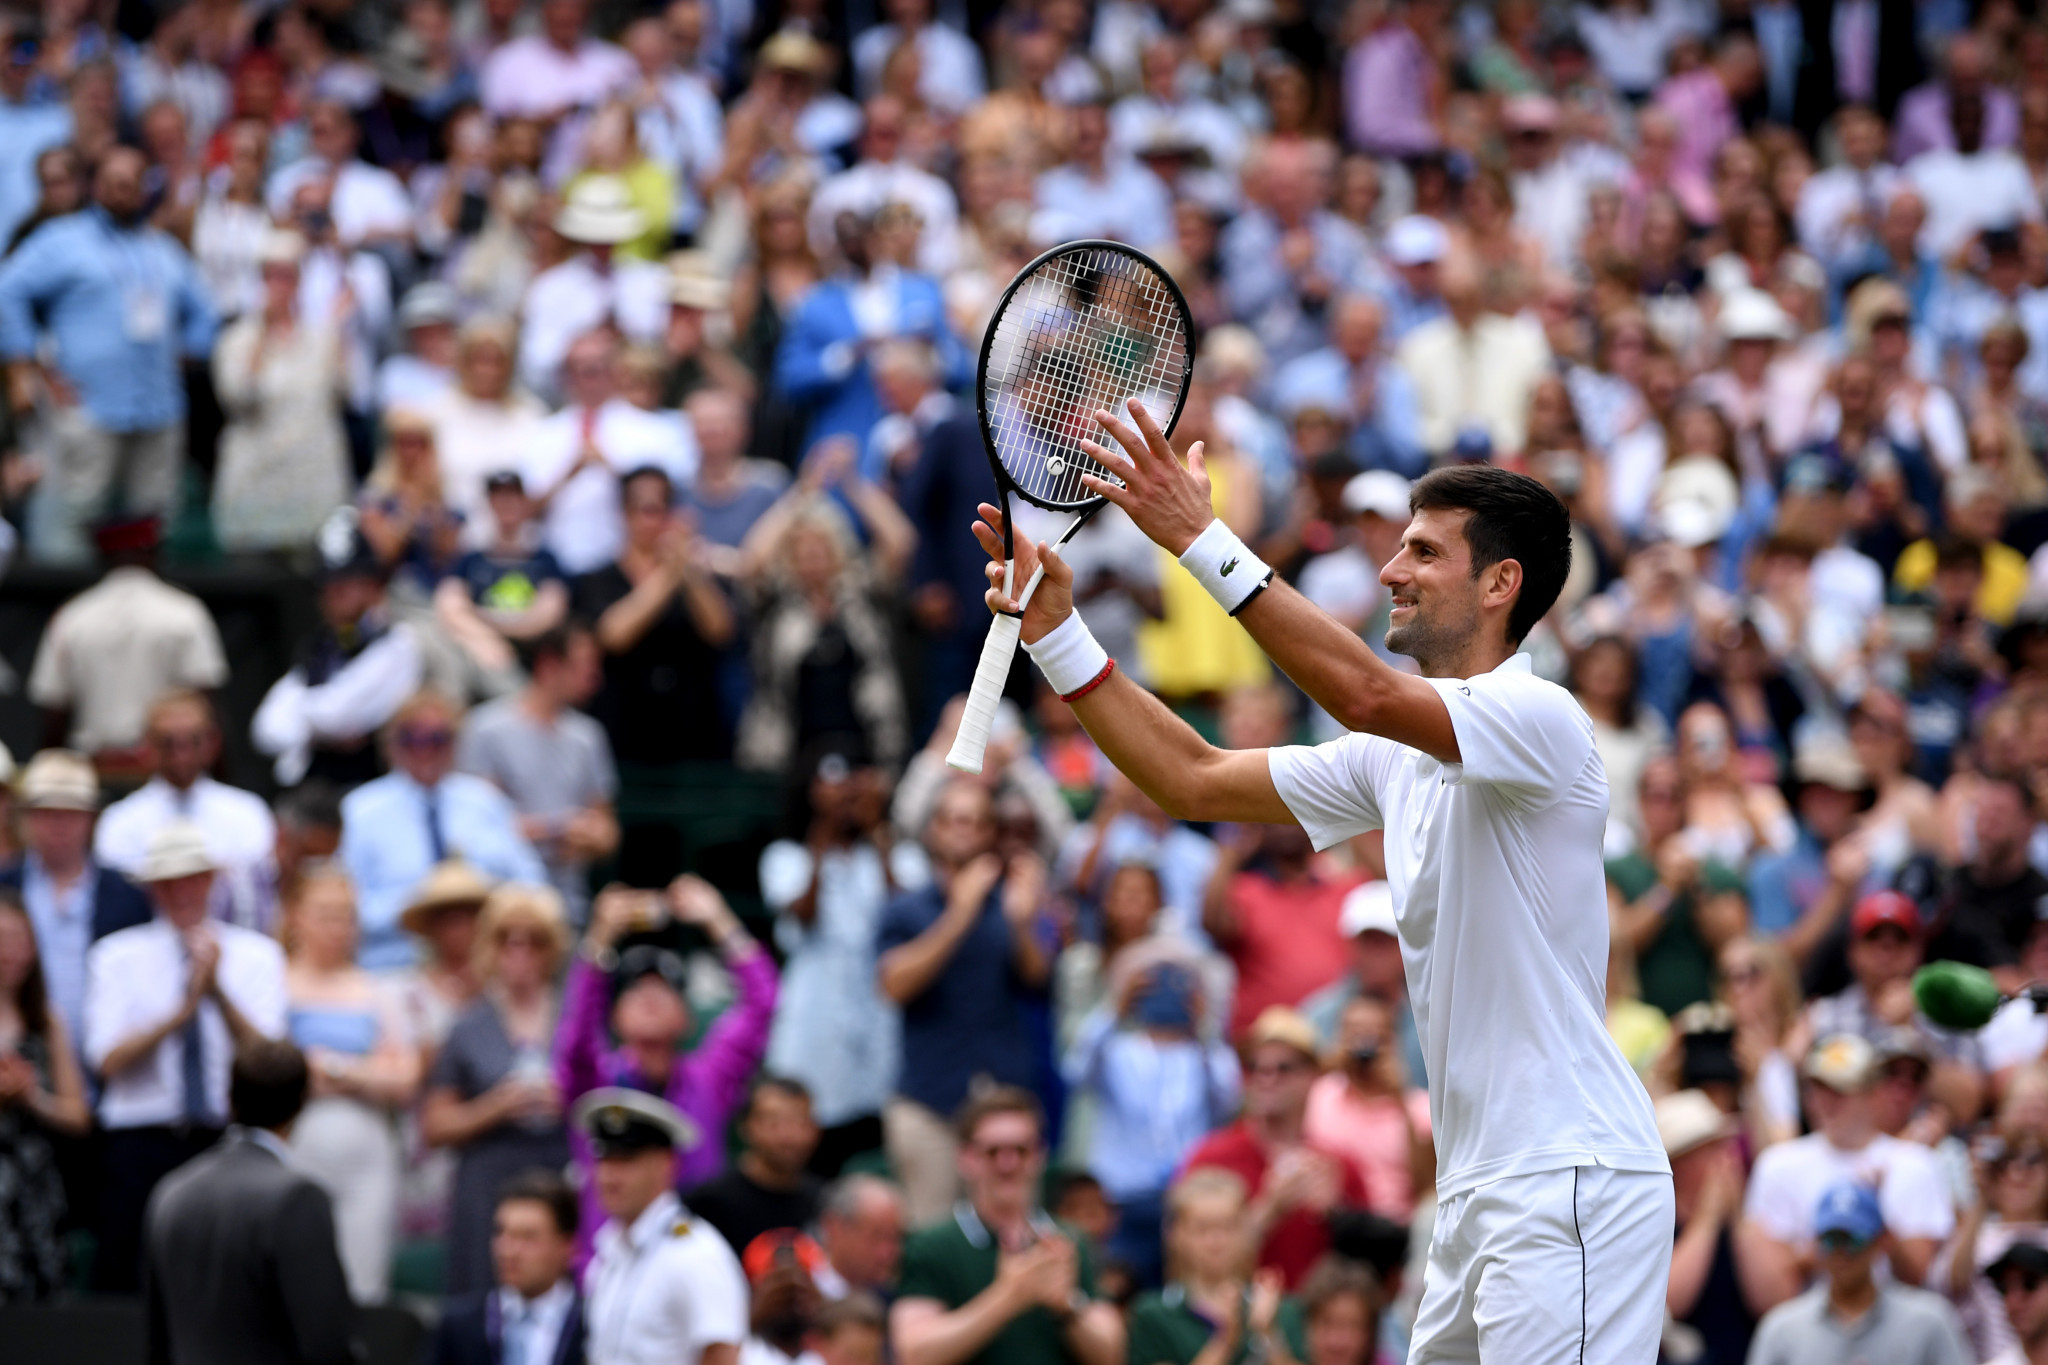 Defending champion Novak Djokovic eased to a straight-sets win over David Goffin to secure his place in the semi-finals of Wimbledon today ©Getty Images